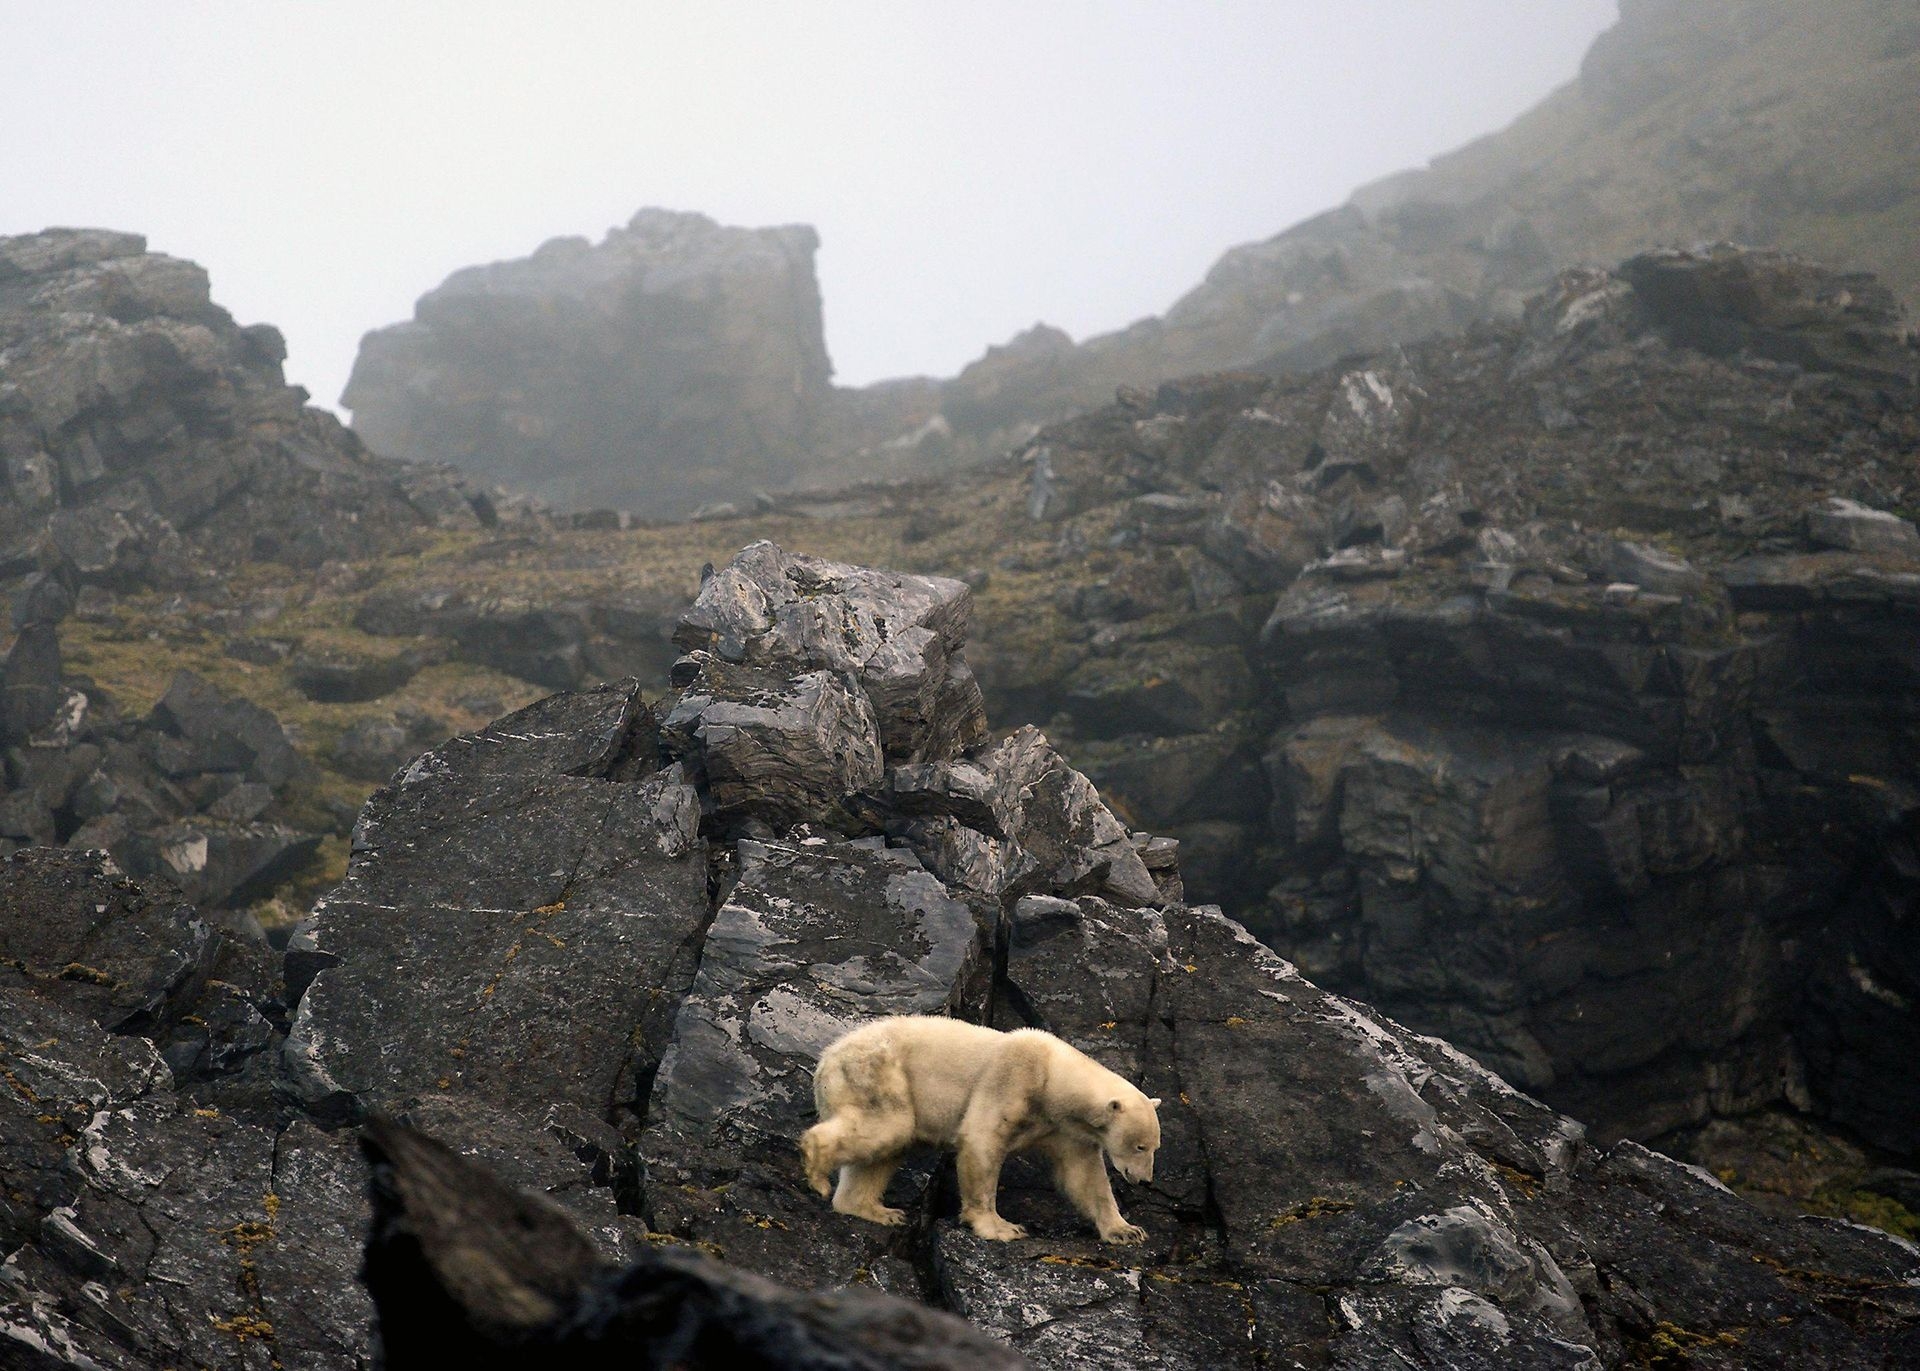 Photograph by Tor Amundsen, National Geographic  